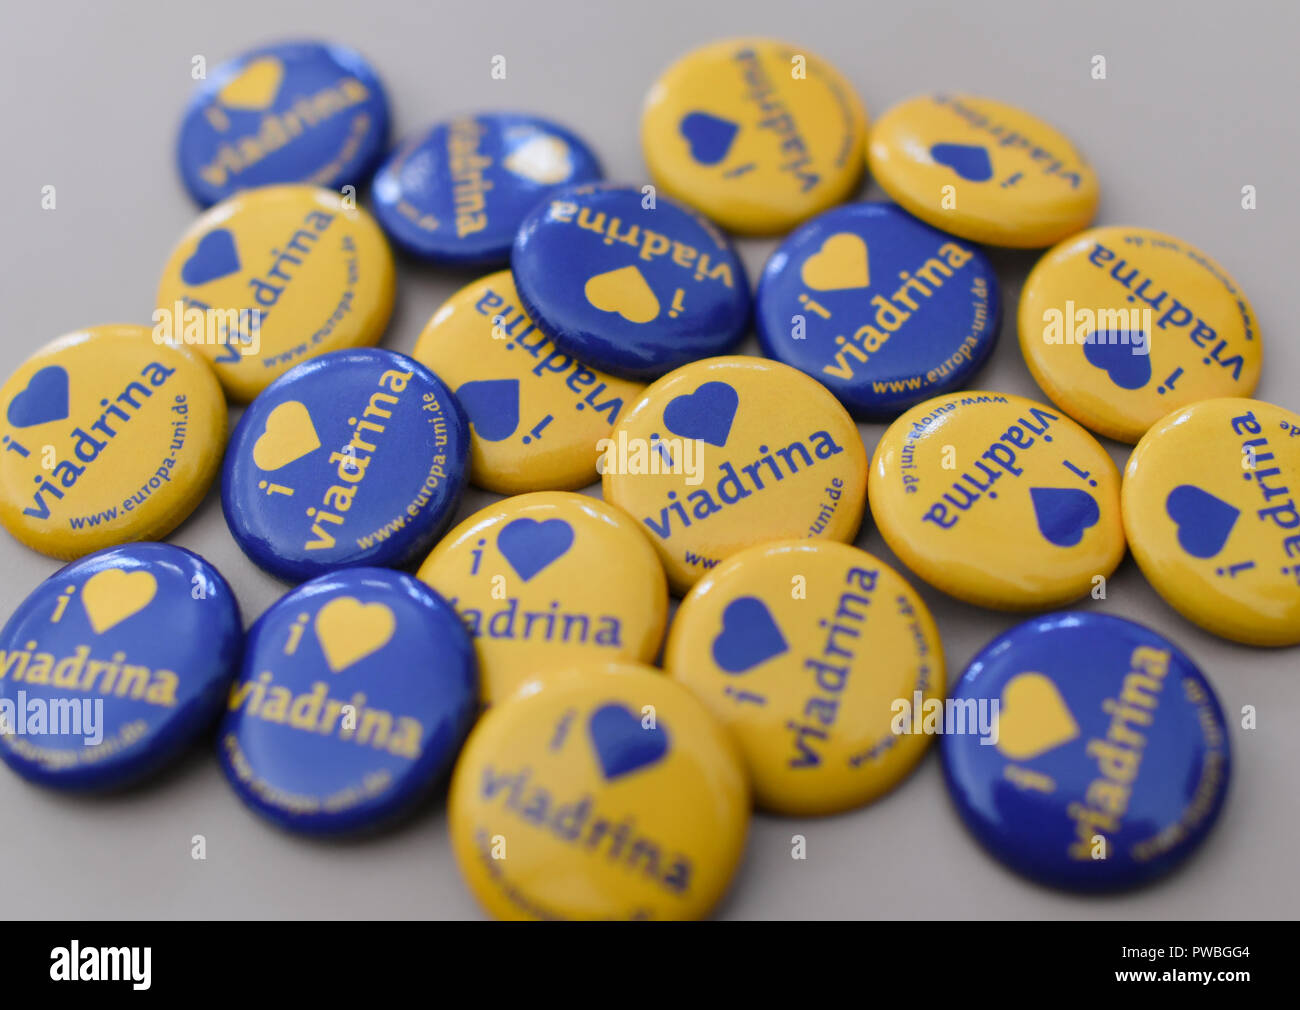 15 October 2018, Brandenburg, Frankfurt (Oder): Viadrina European University badges are lying on a table during a press conference on the start of the new academic year. The new President of the European University Viadrina, Julia von Blumenthal, will be officially inaugurated on 18.10.2018 at a ceremony. The Viadrina lives from its internationality, which goes far beyond the framework of Europe: Around 6,500 students from more than 100 countries come together here. Photo: Patrick Pleul/dpa-Zentralbild/dpa Stock Photo